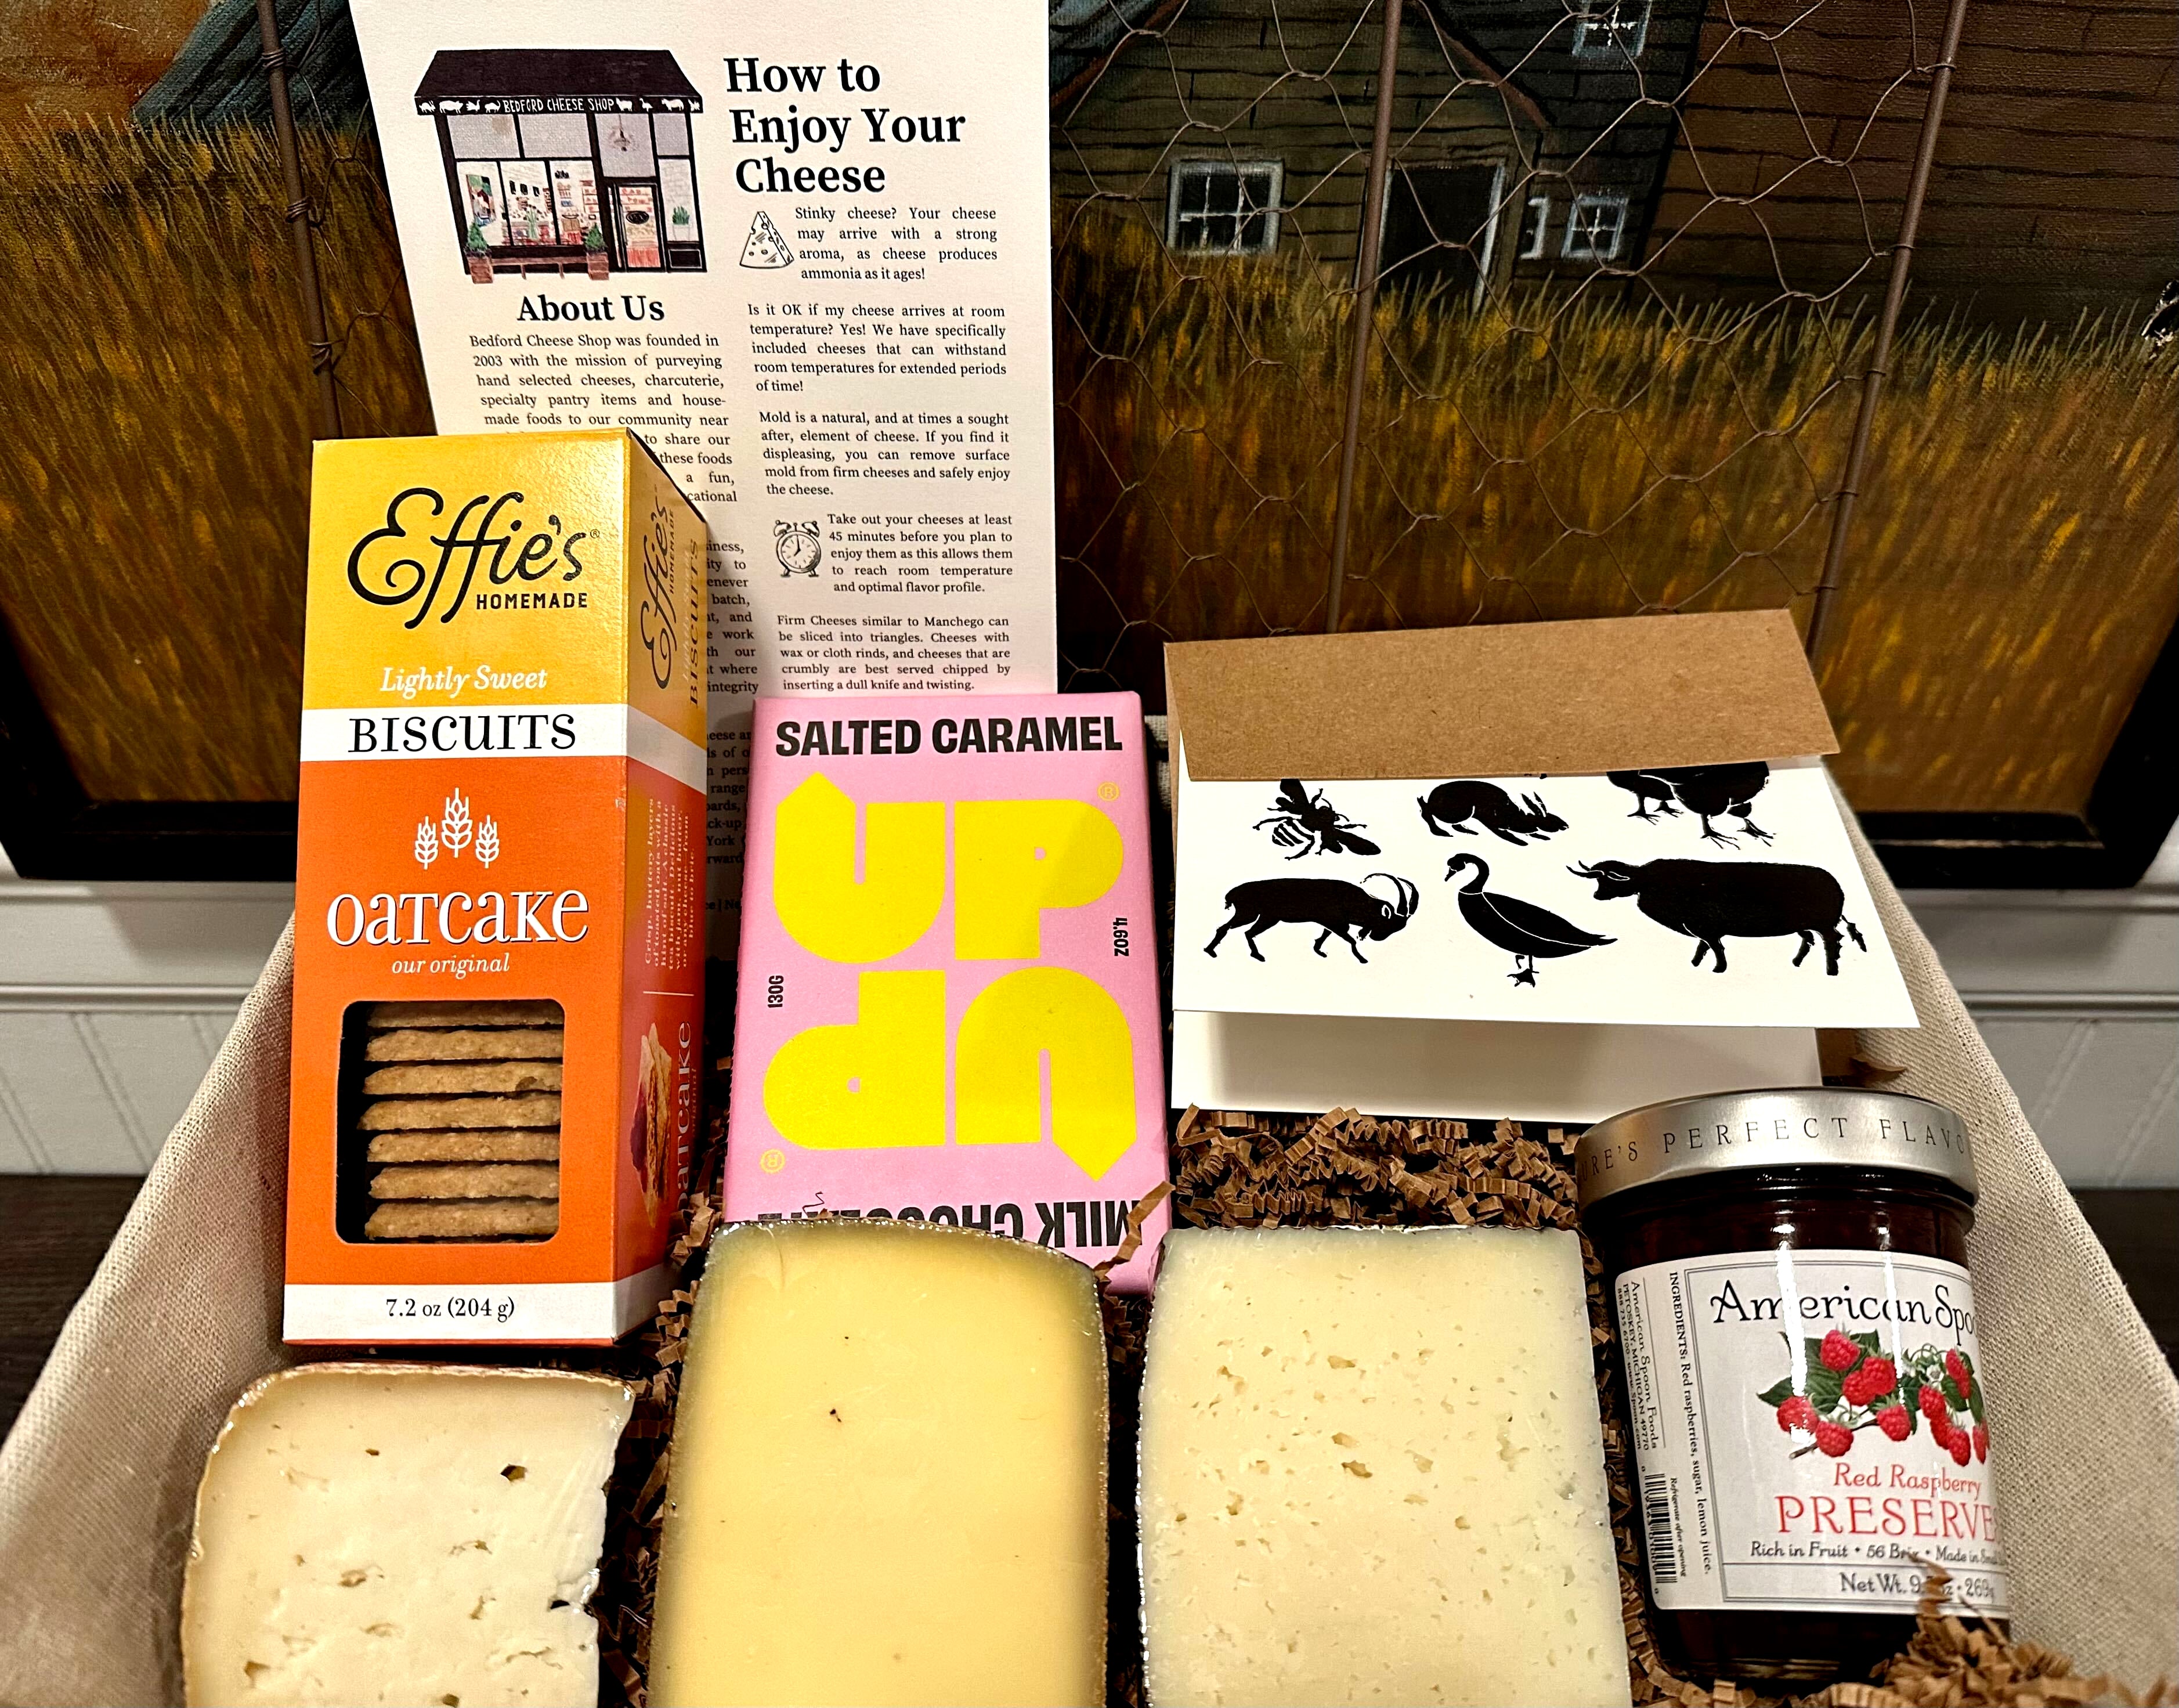 Image of the Madison Park gift basket contents inside the wire gift basket. Includes jam, crackers, chocolate, assorted cheeses, and a card.  